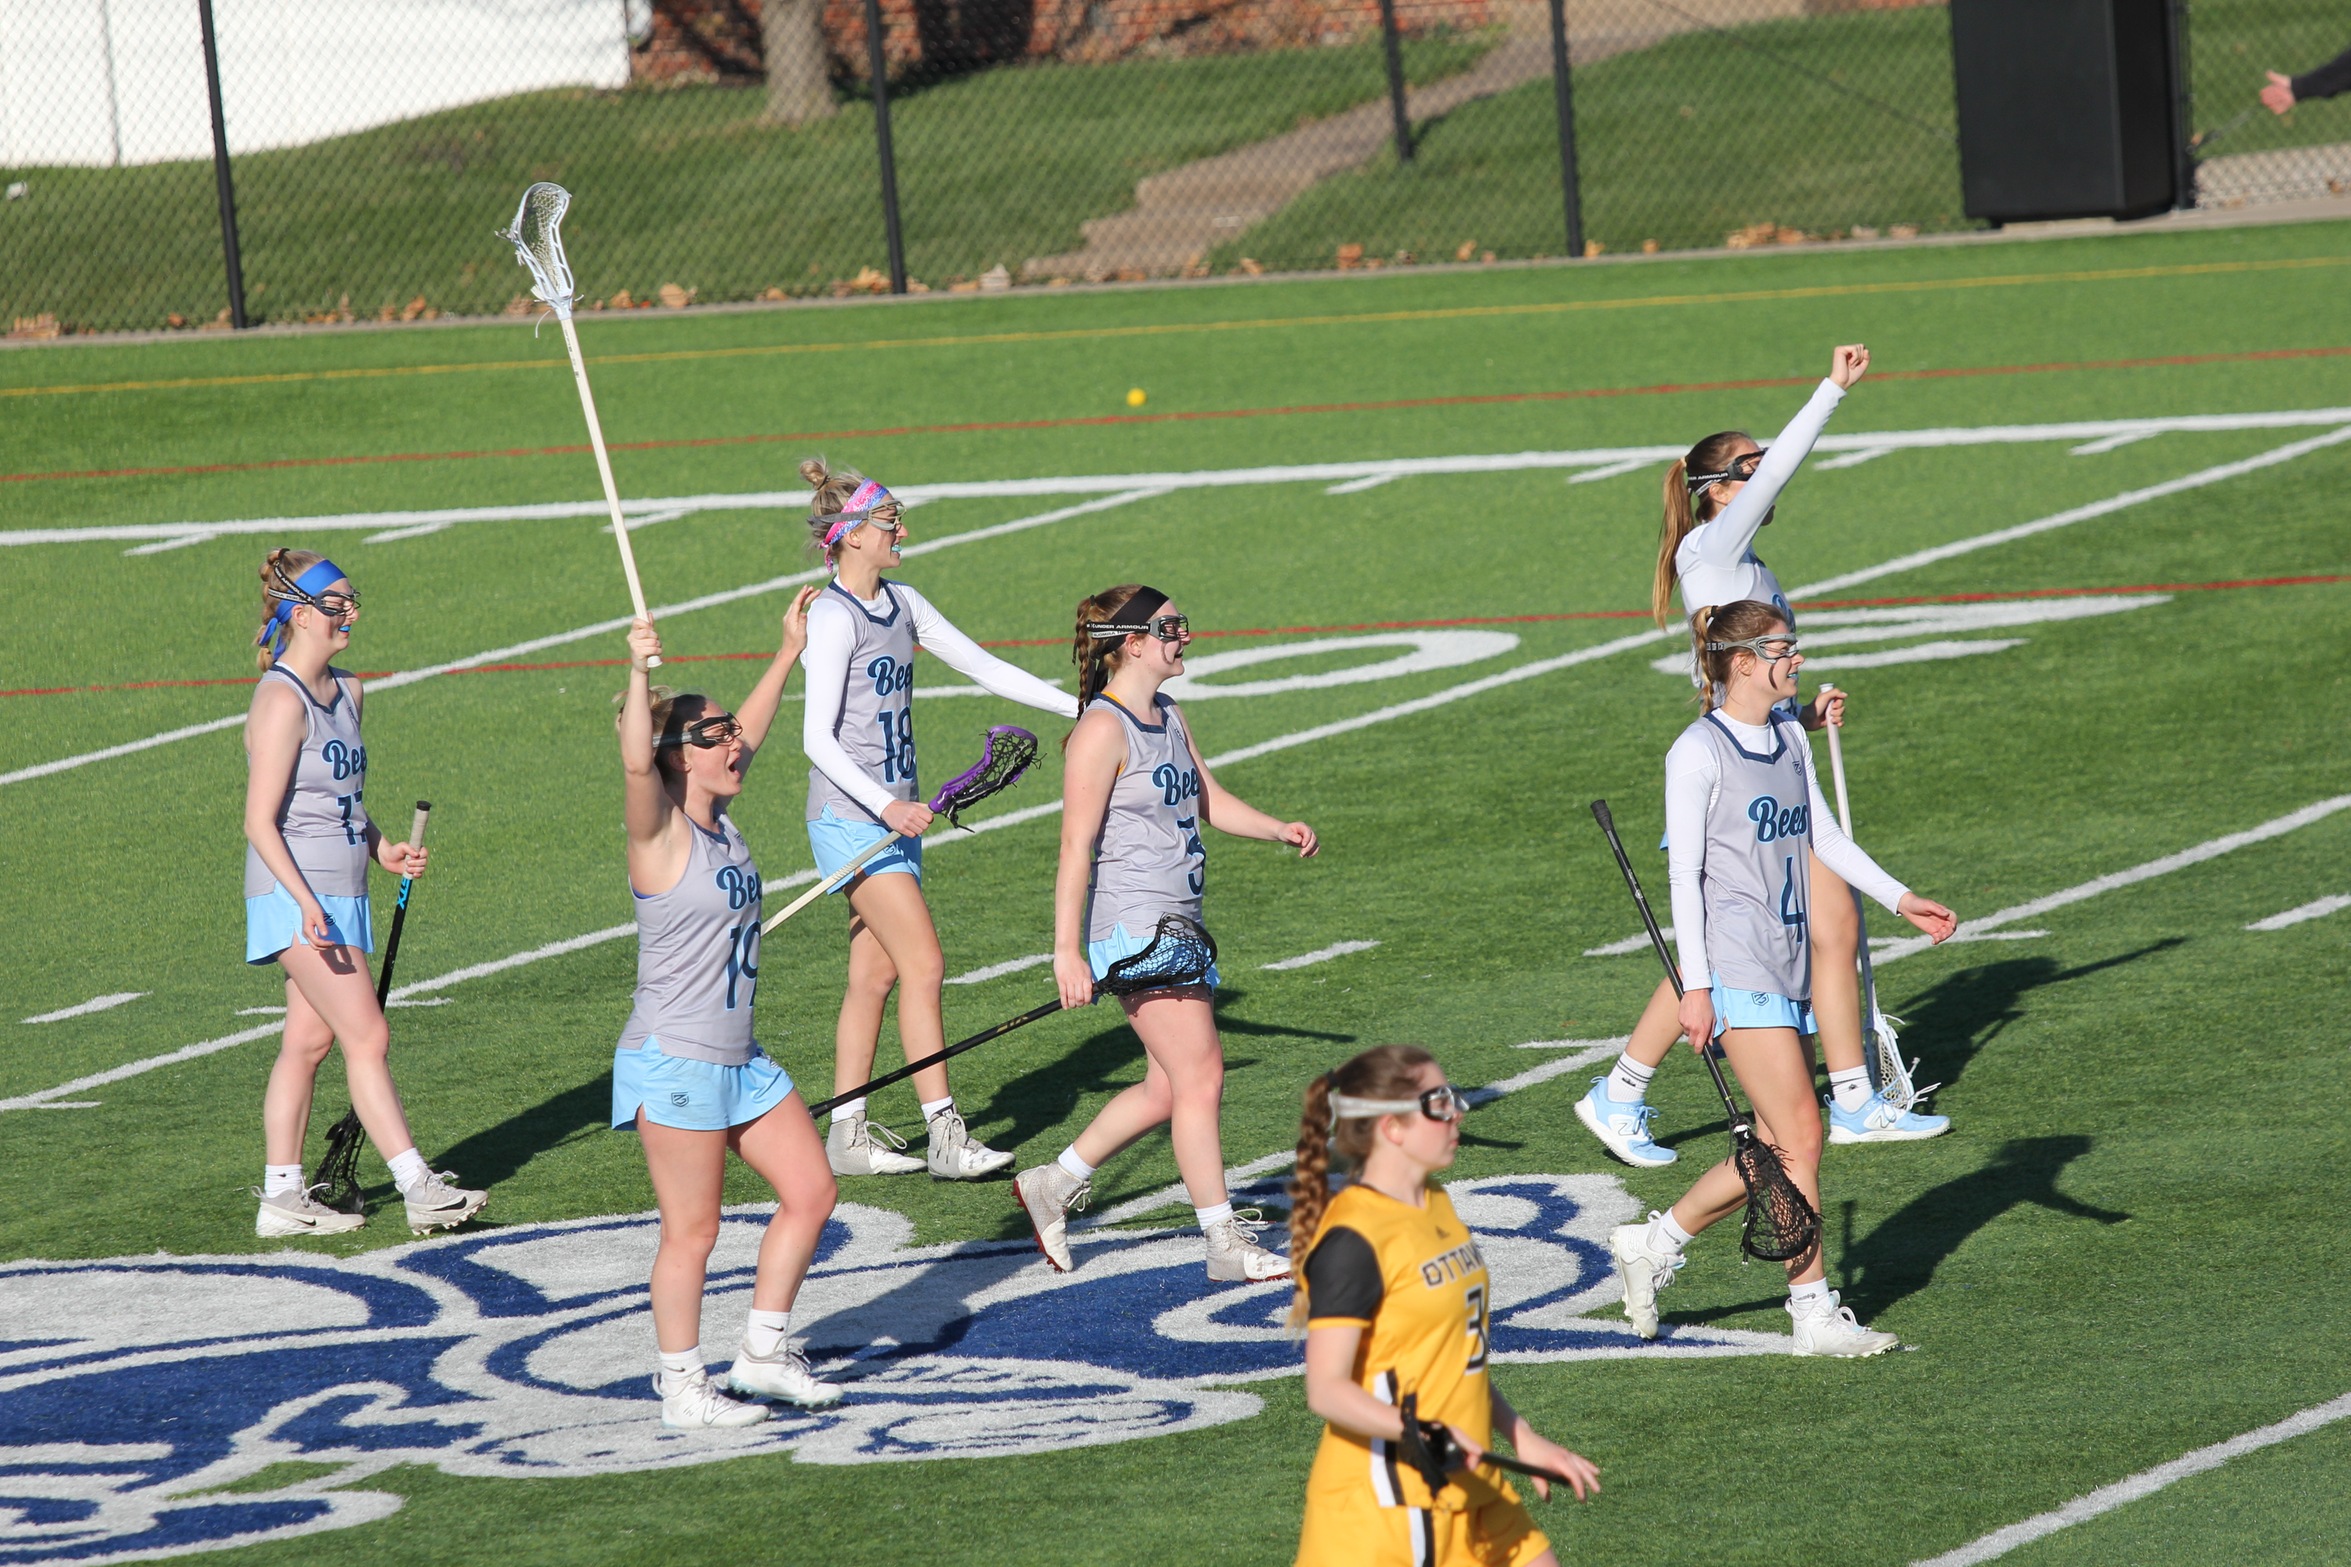 Heart of America Conference Tournament Preview - Women's Lacrosse